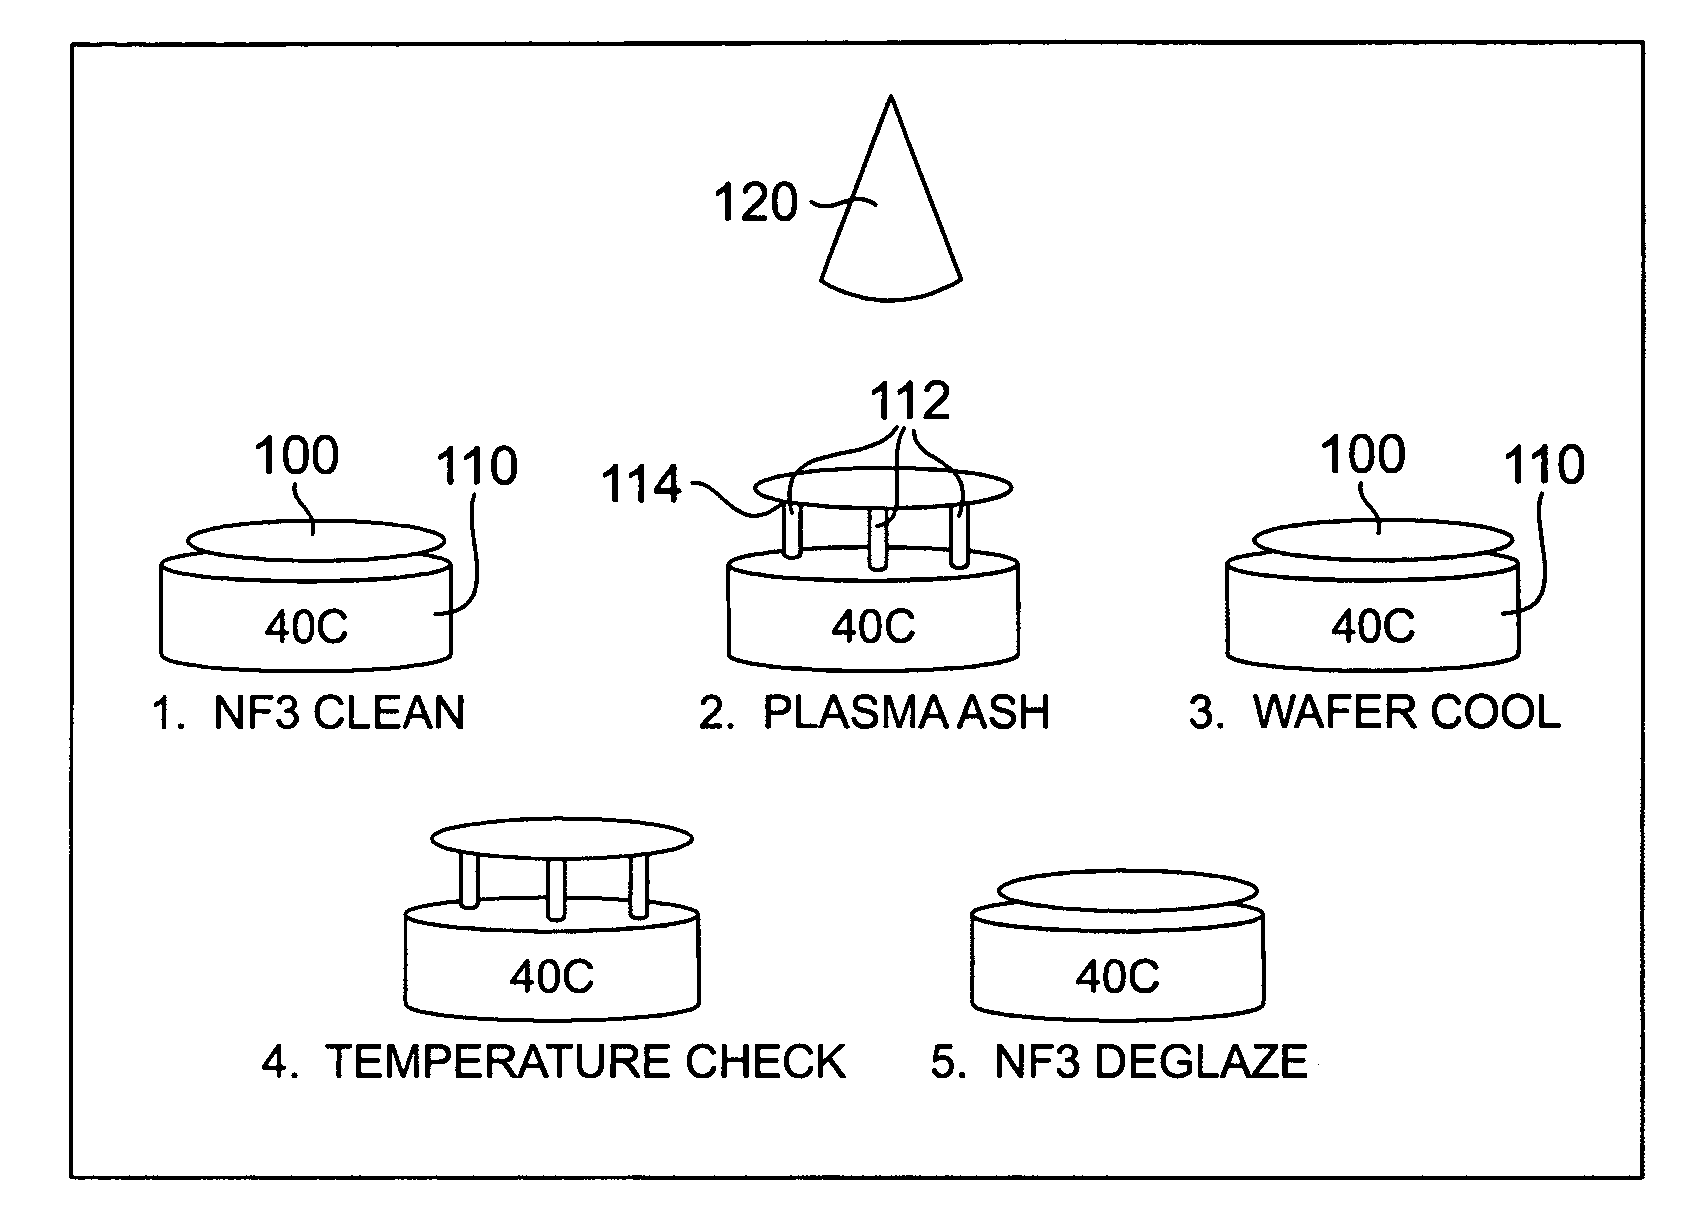 Methods of downstream microwave photoresist removal and via clean, particularly following Stop-On TiN etching